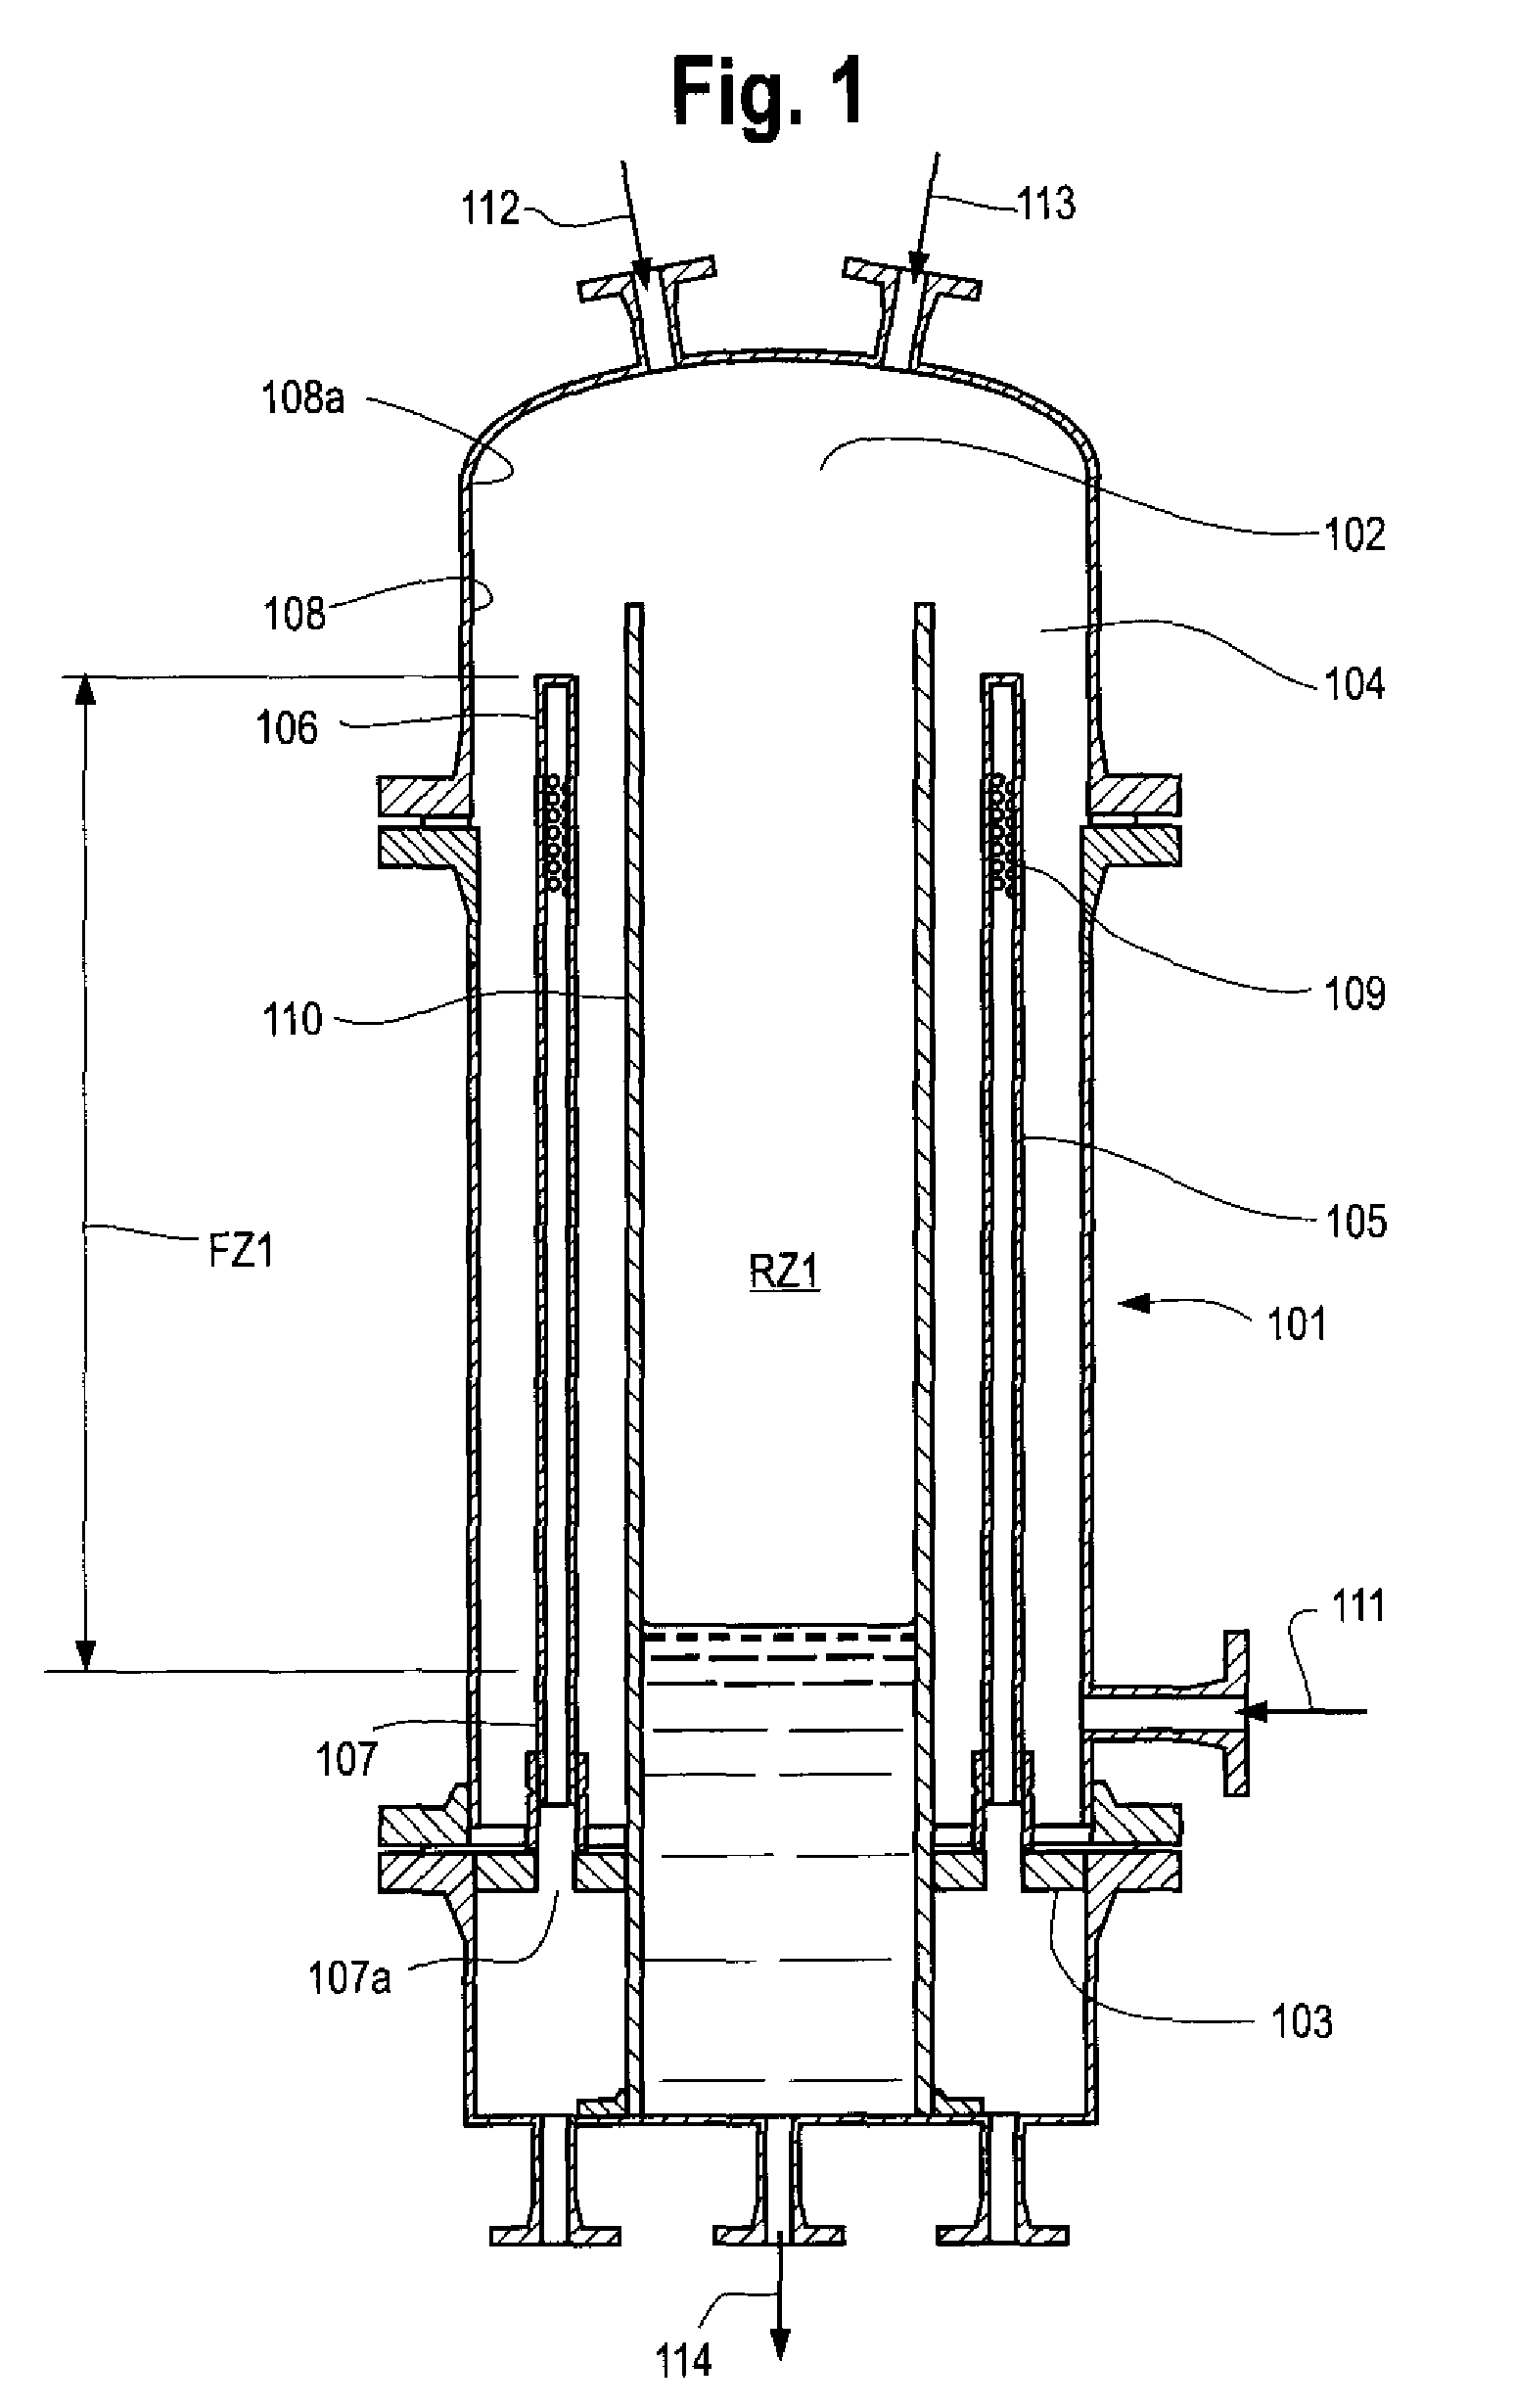 Apparatus and Process for the Separation of Solids and Liquids